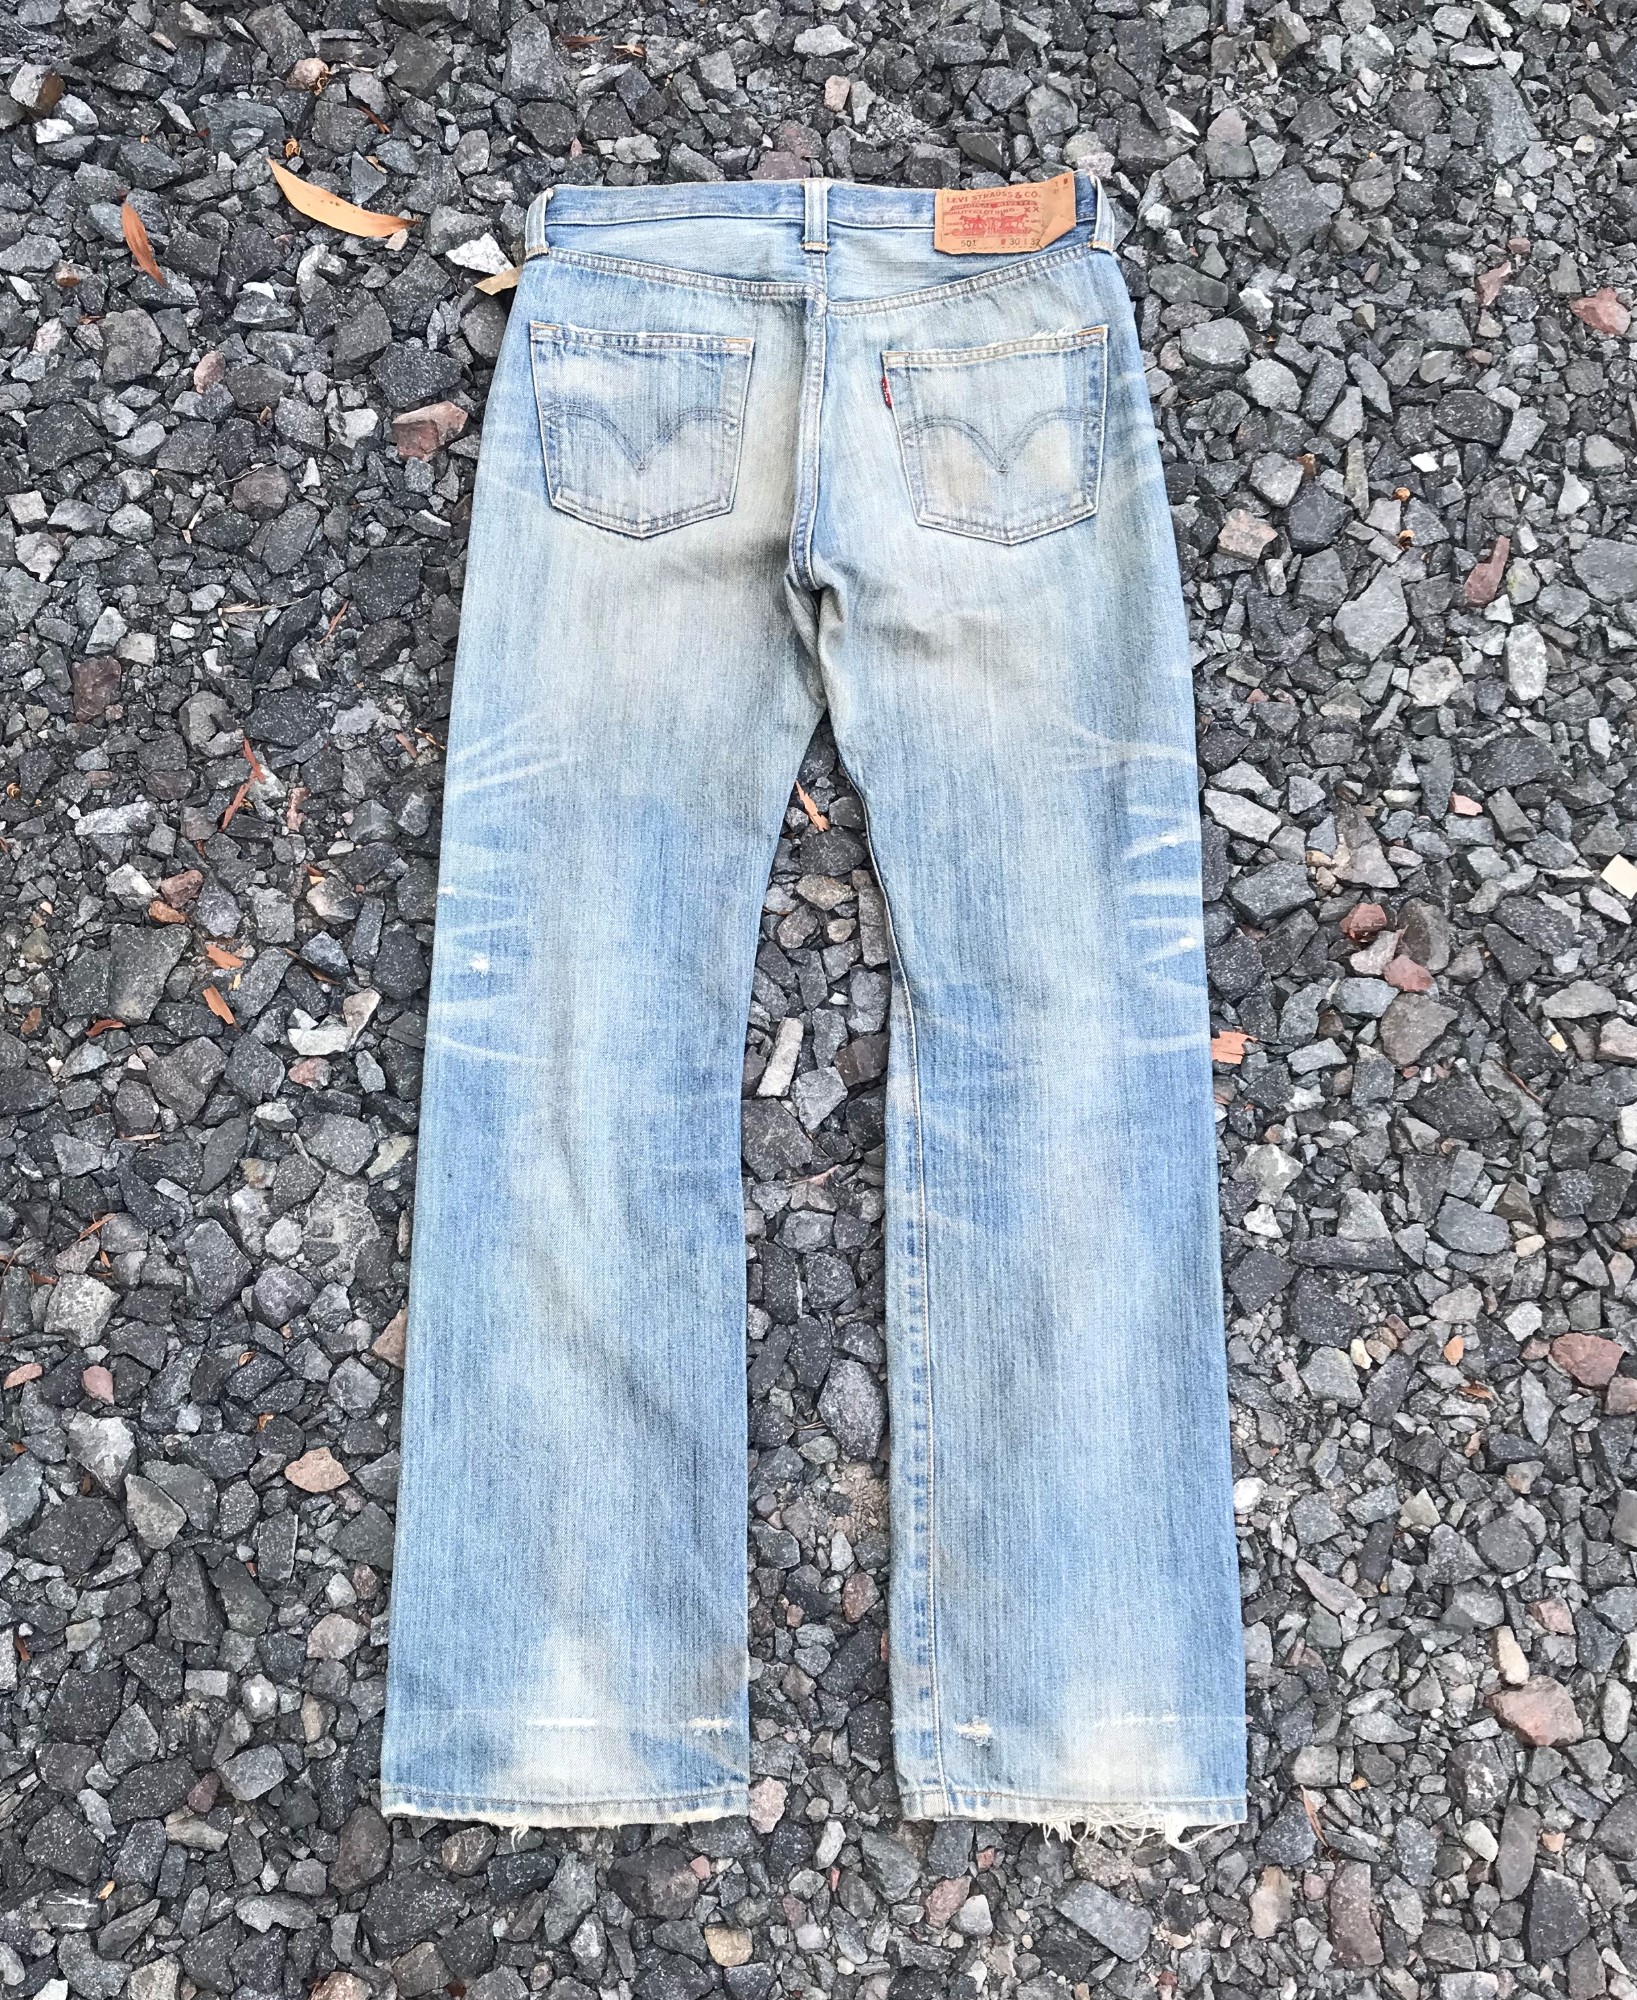 Vintage Levis 501 faded Distressed denim Waist 30x32 inch trashed ripped kurt cobain style - 4